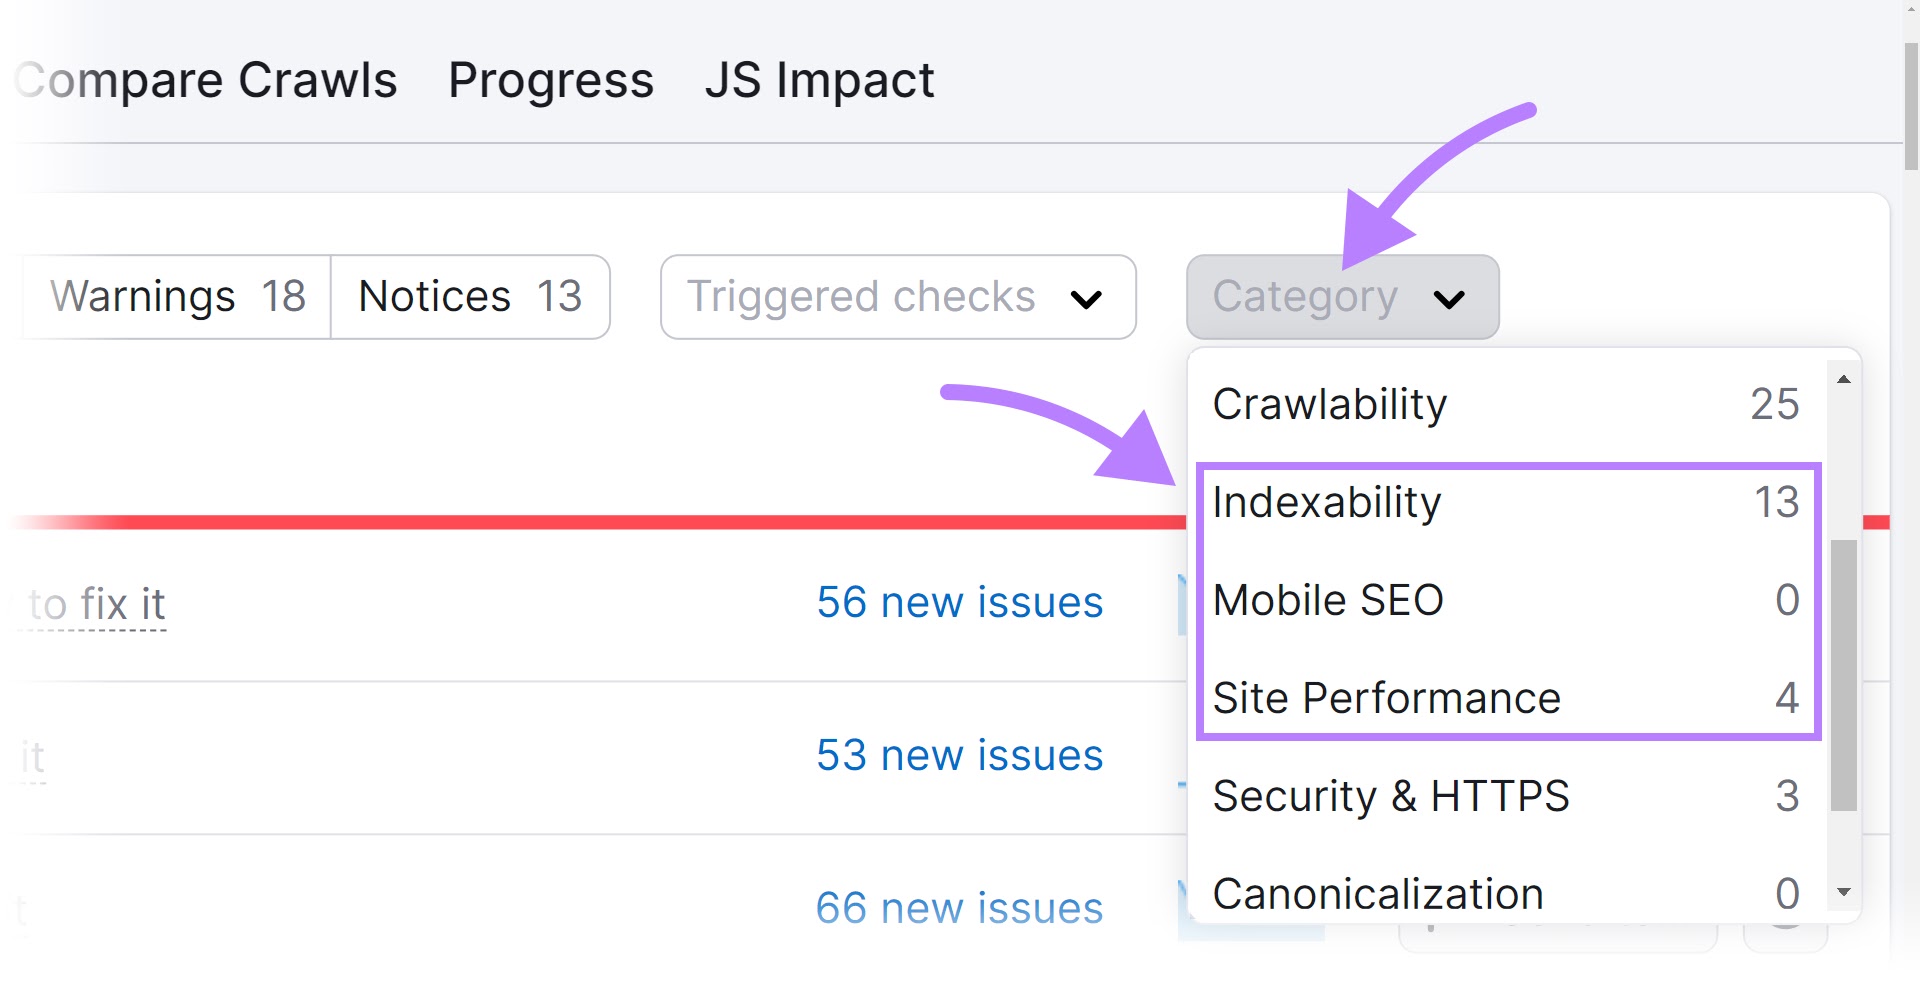 “Site Performance,” “Mobile SEO,” and “Indexability” selected from “Category” filter drop-down